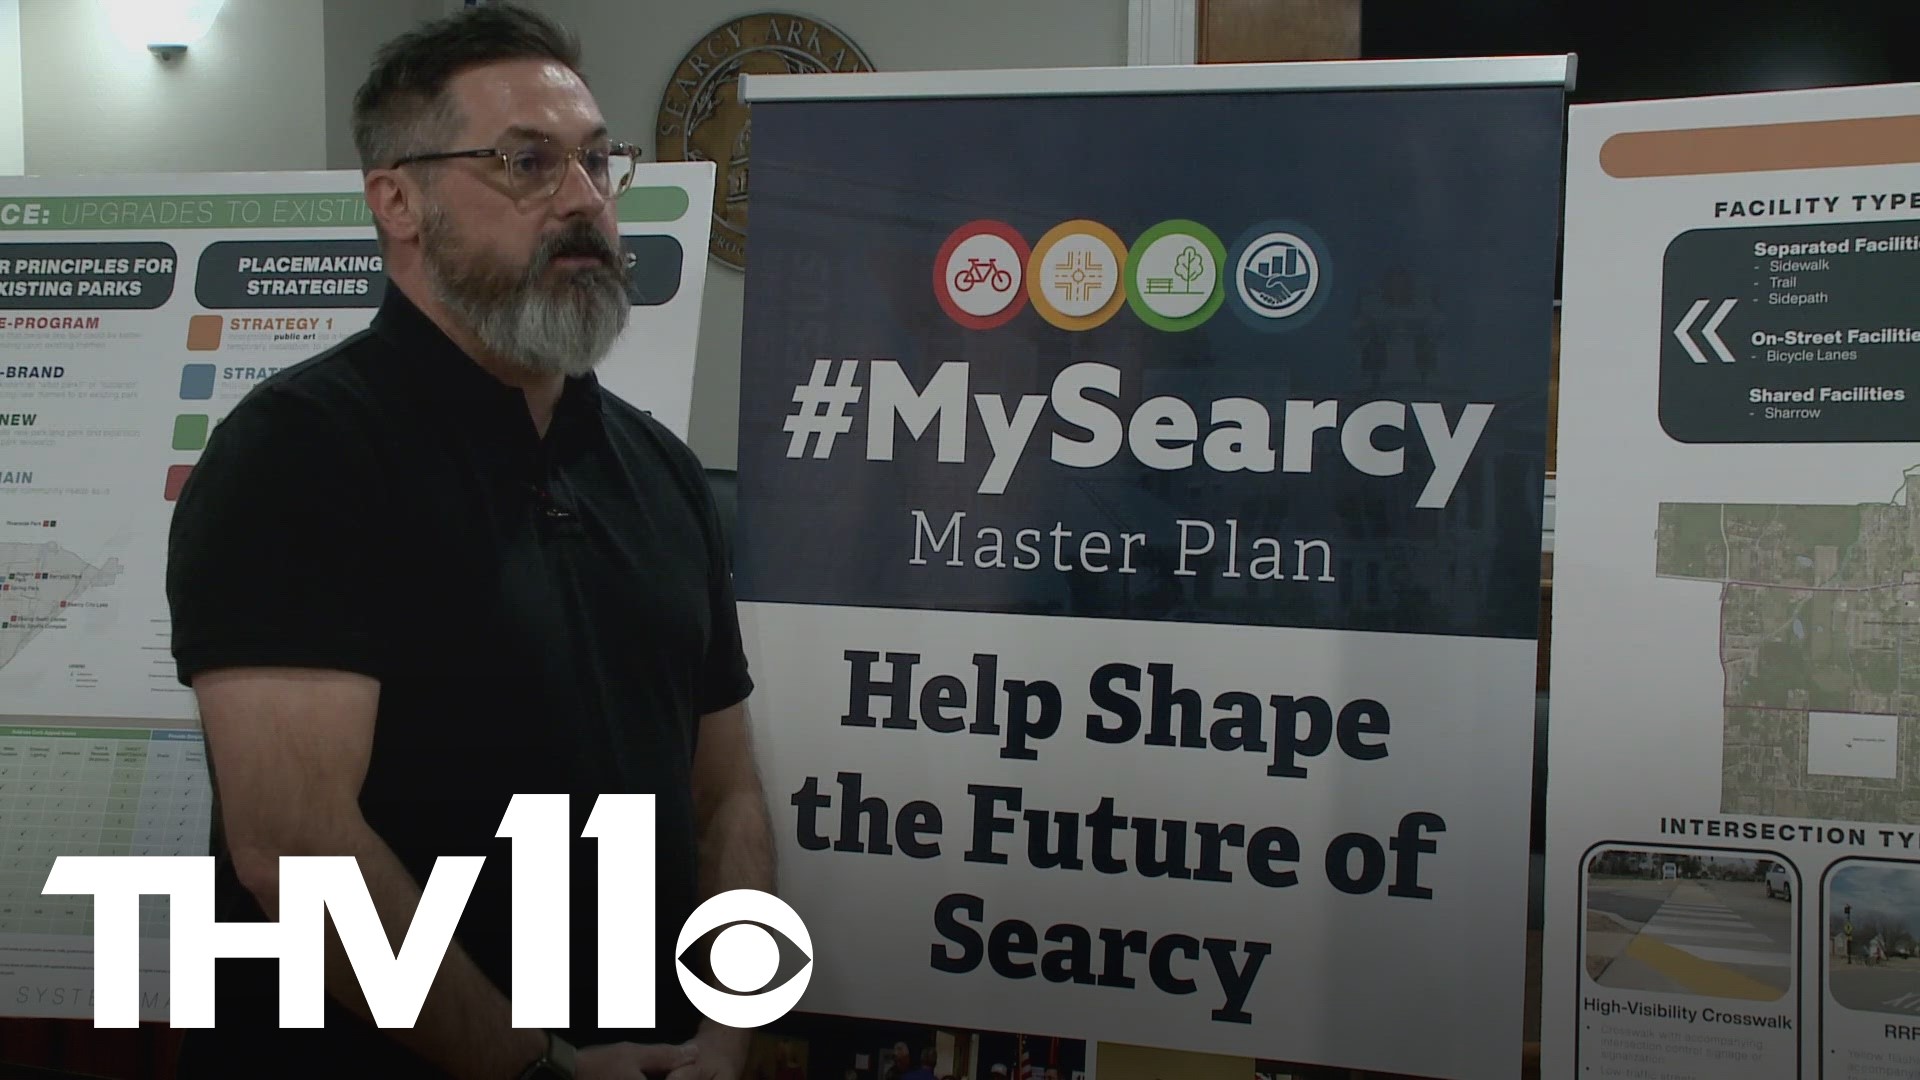 Big plans are in the works in Searcy as city leaders develop a 20-year master plan to revitalize the community.